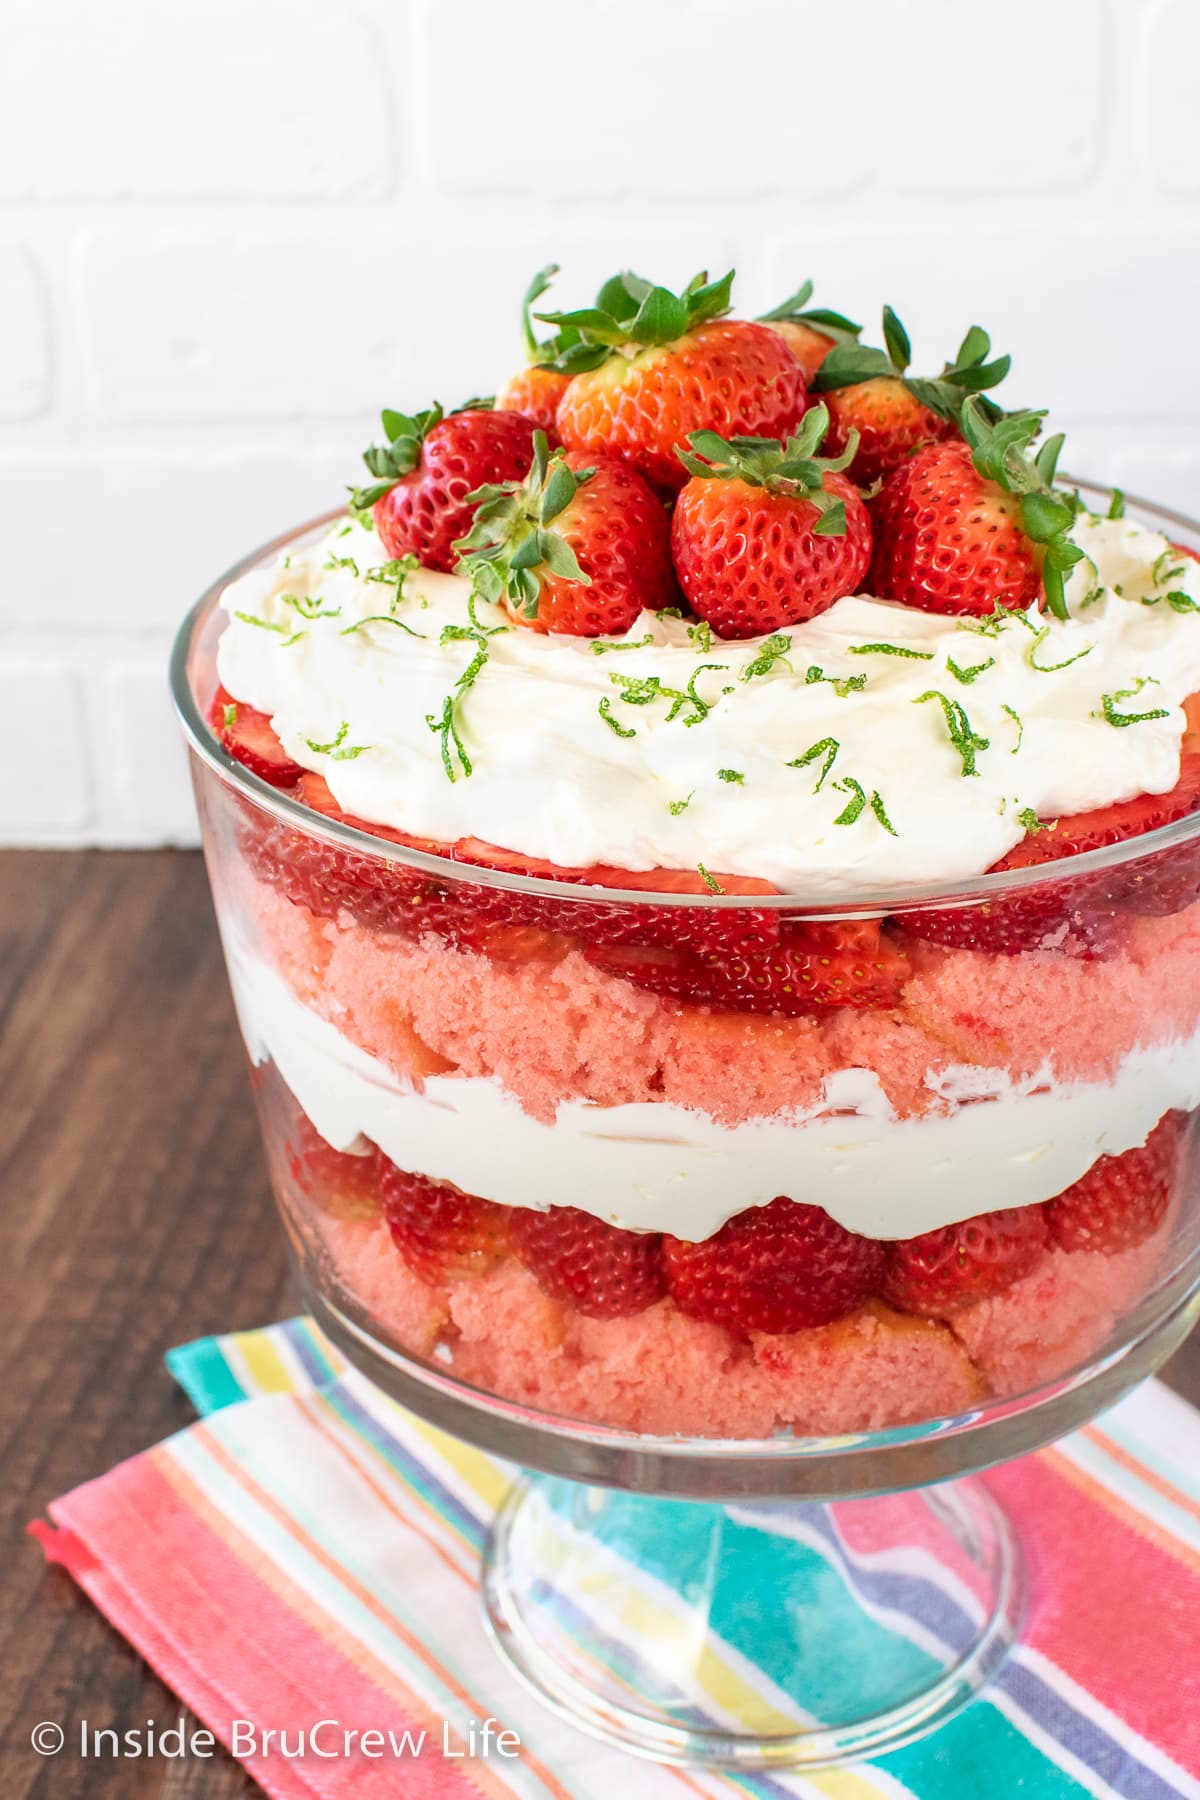 A clear bowl filled with cake, cheesecake, and berries.